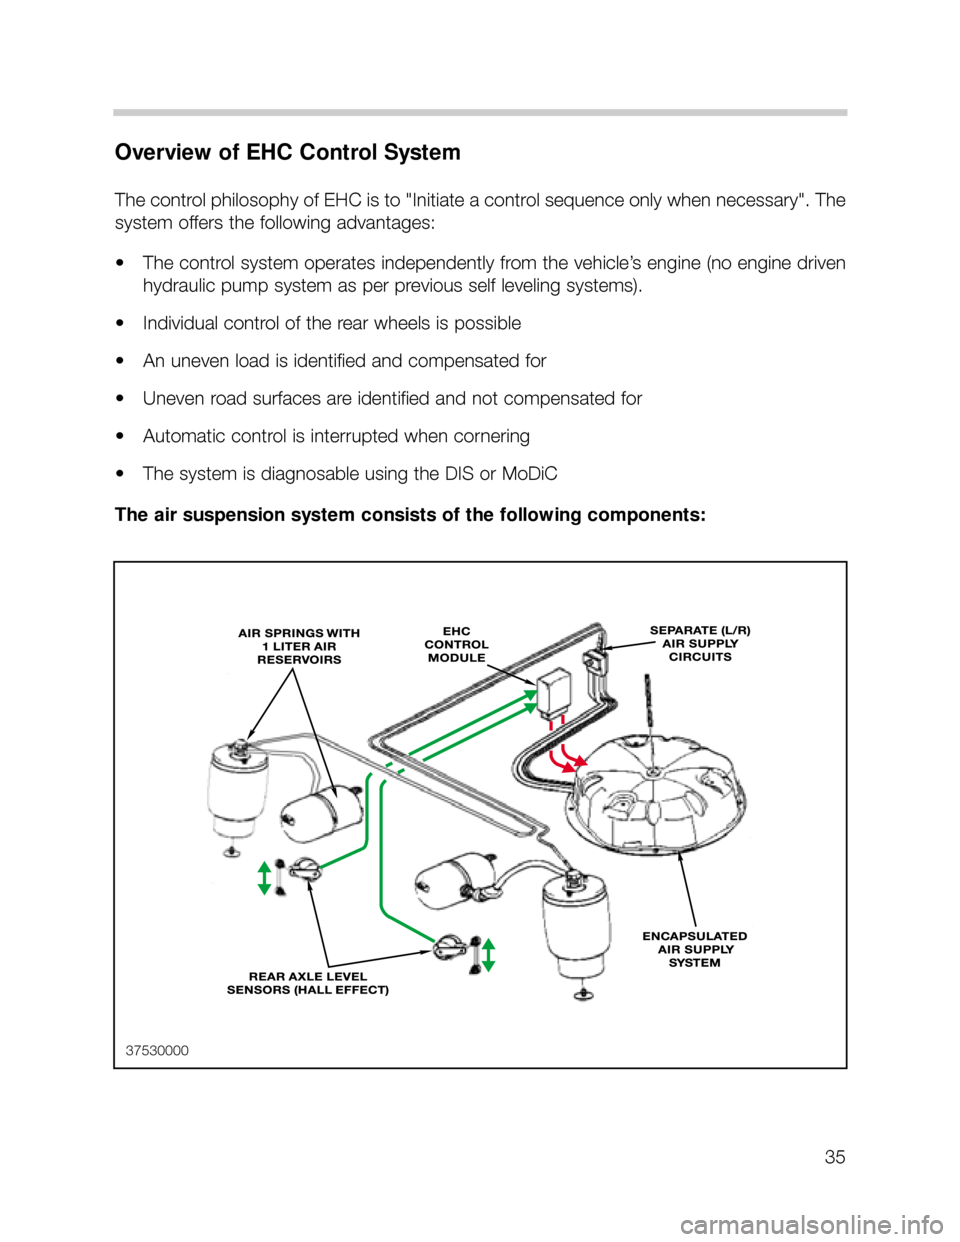 BMW X5 2004 E53 Workshop Manual 35
Overview of EHC Control System
The control philosophy of EHC is to "Initiate a control sequence only when necessary". The
system offers the following advantages:
• The control system operates ind